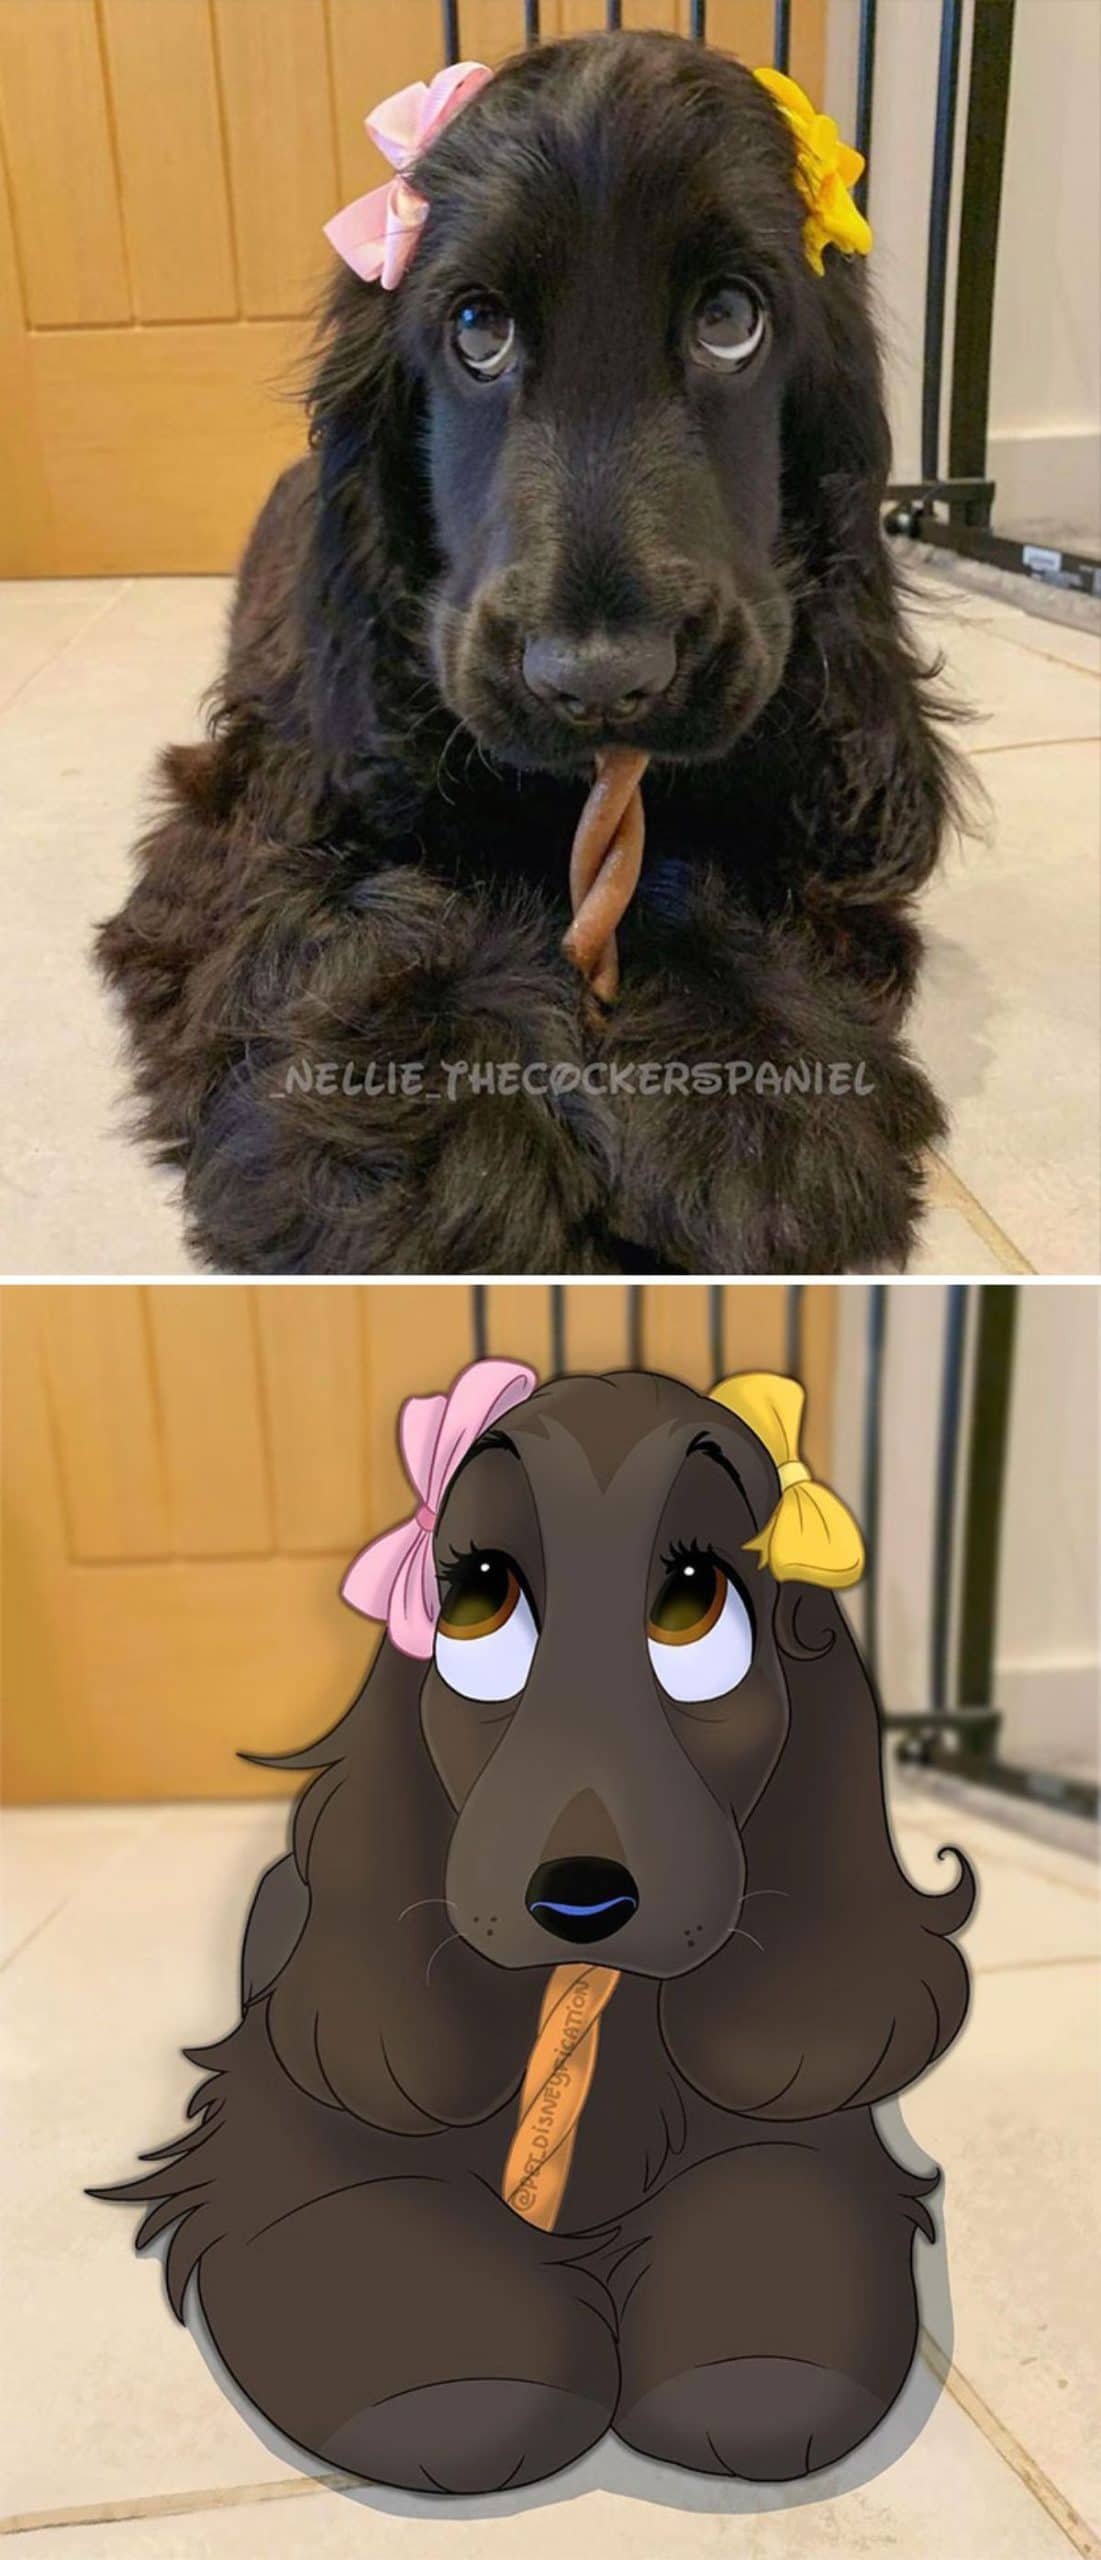 real photo and cartoon image of a black cocker spaniel eating a brown treat with a pink bow and yellow bow on either ear